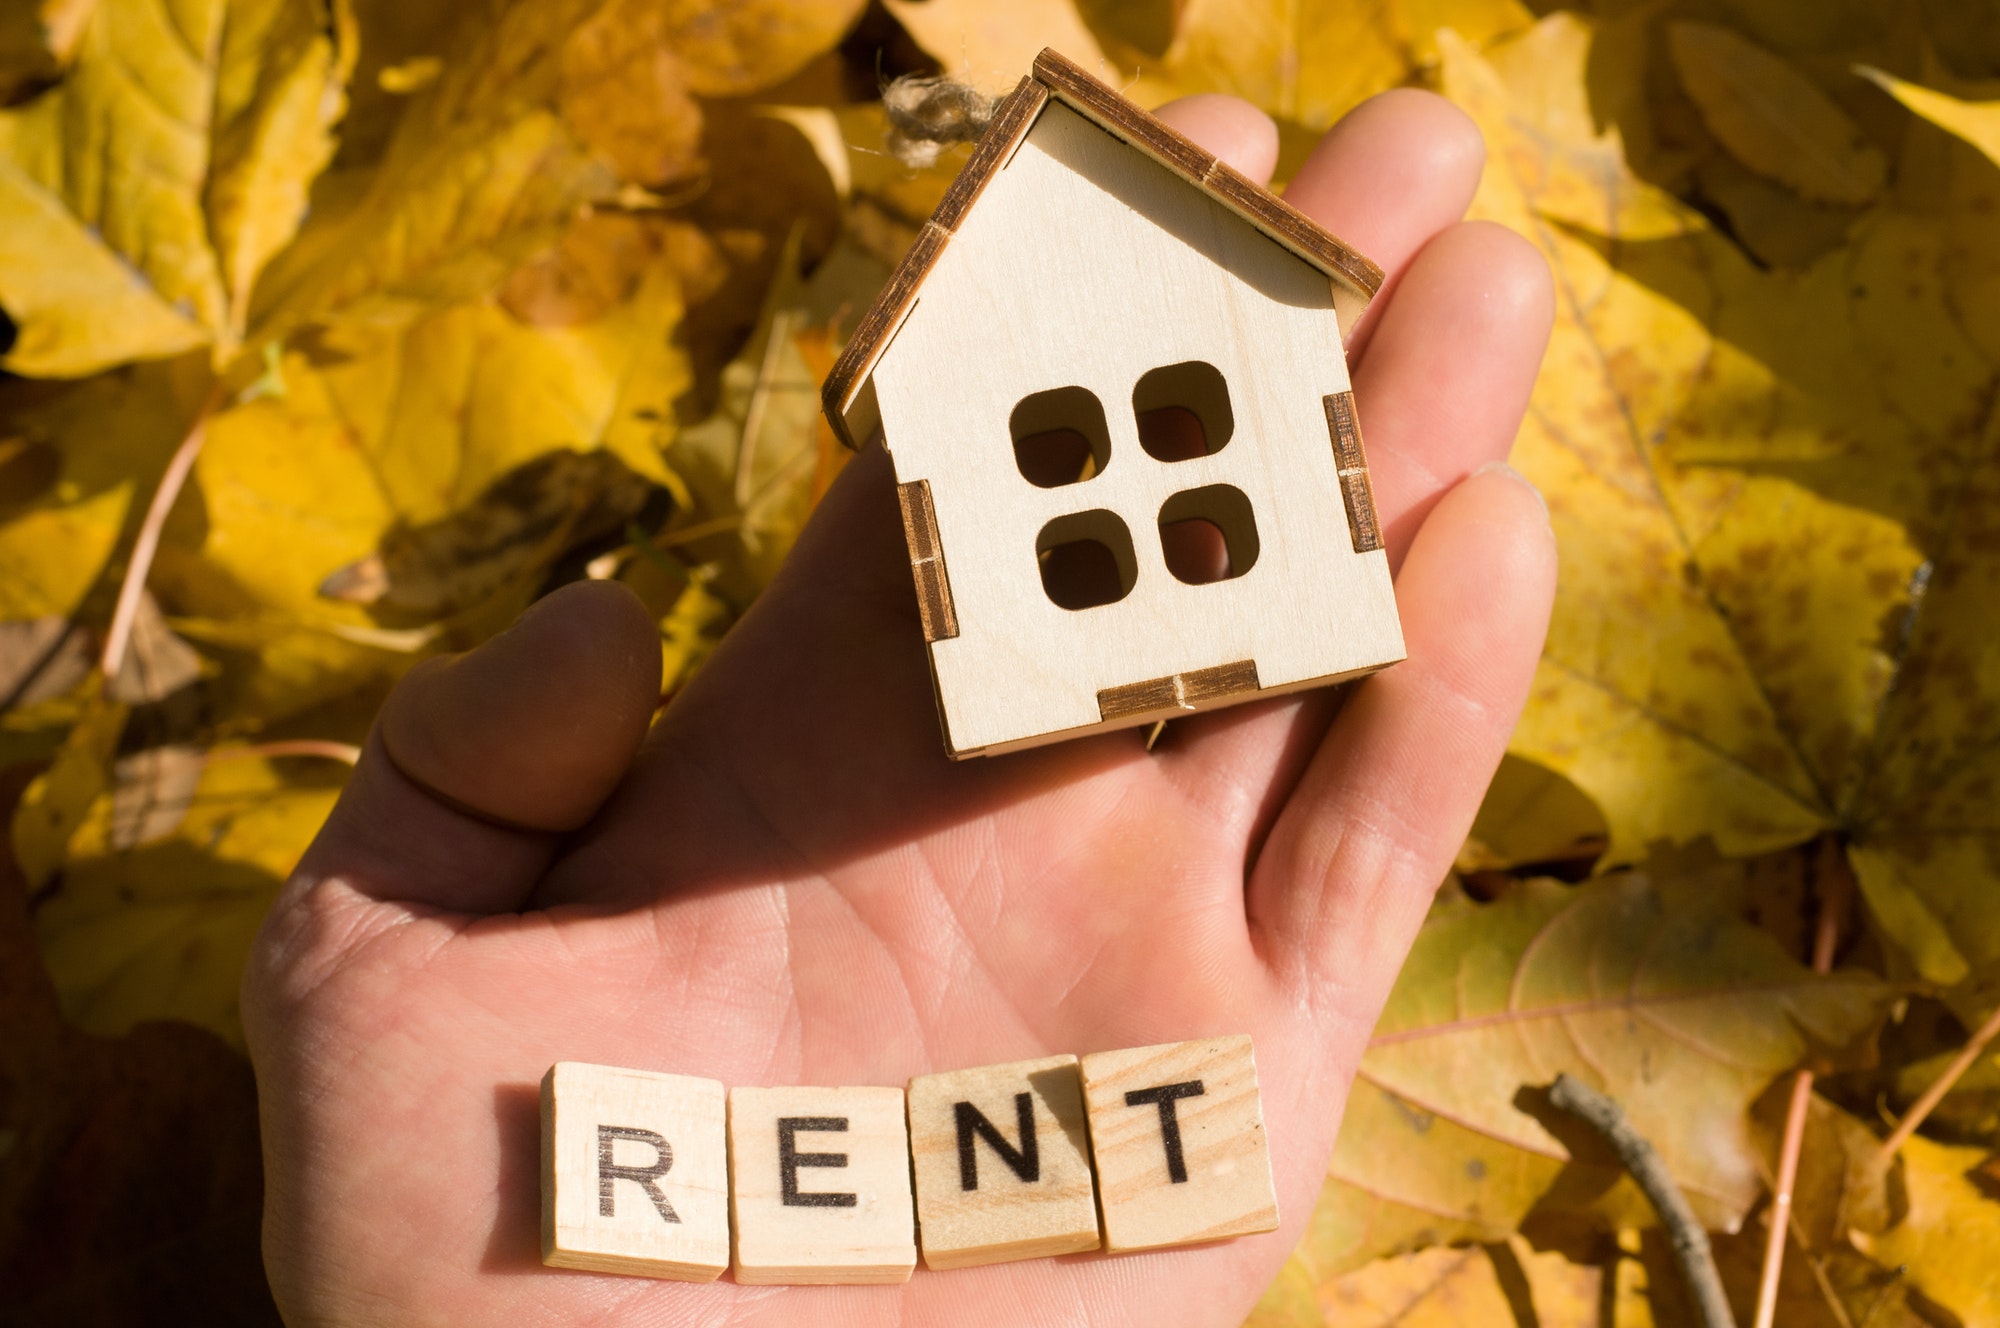 Cost of renting in Spain up 0.6% in August